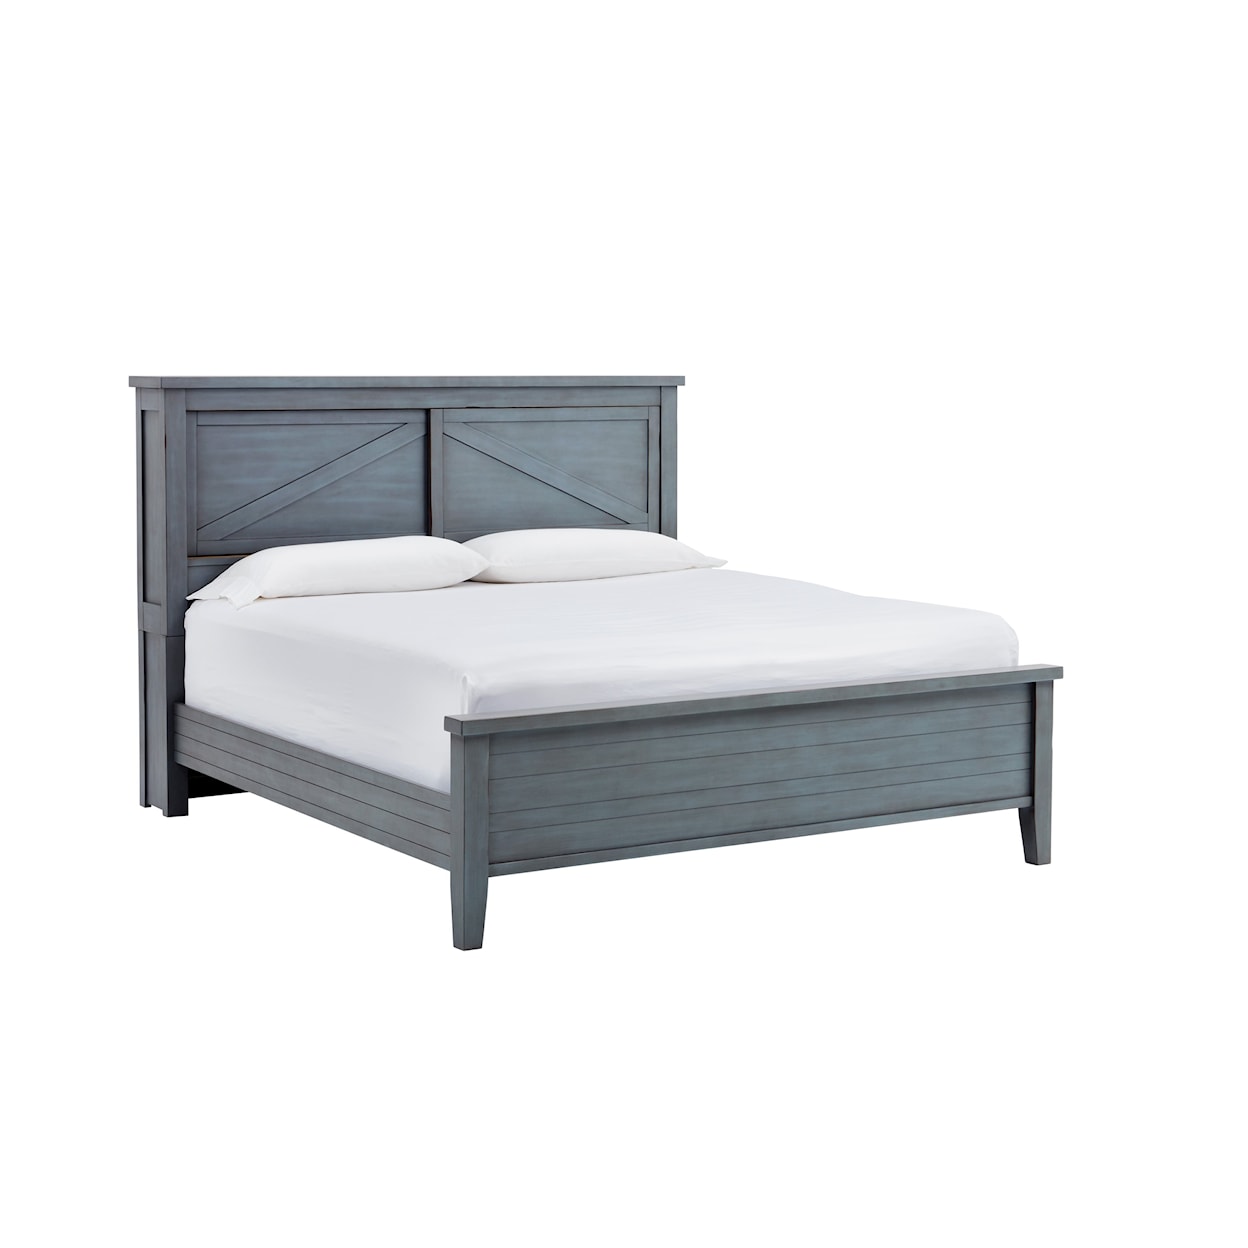 Aspenhome Pinebrook Cal. King Bookcase Bed